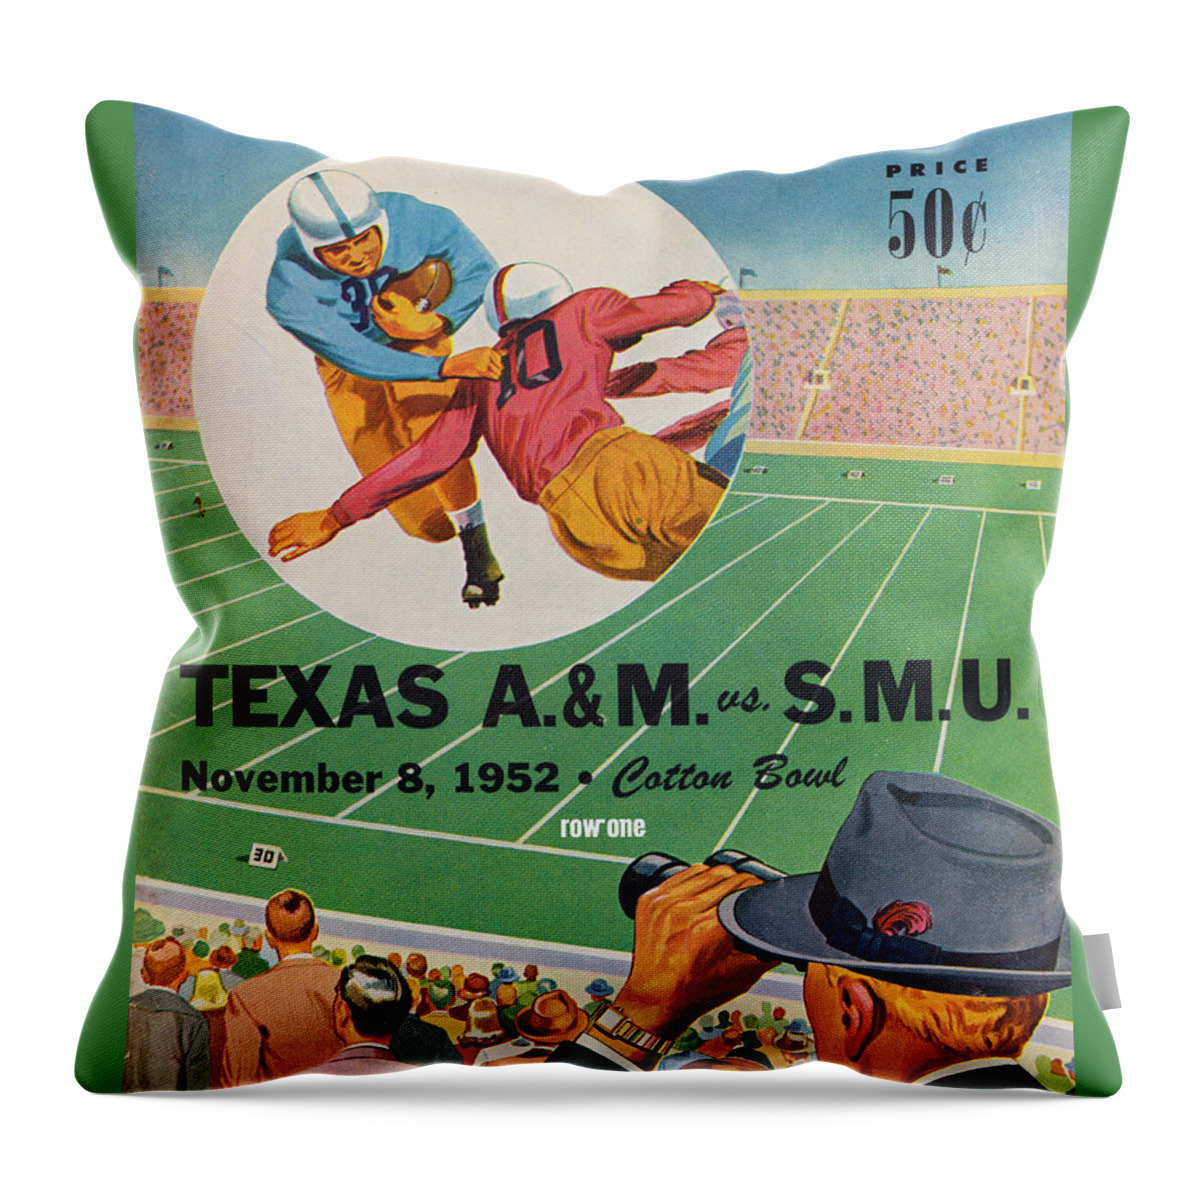 Smu Throw Pillow featuring the mixed media 1952 Southern Methodist University Football Art by Row One Brand